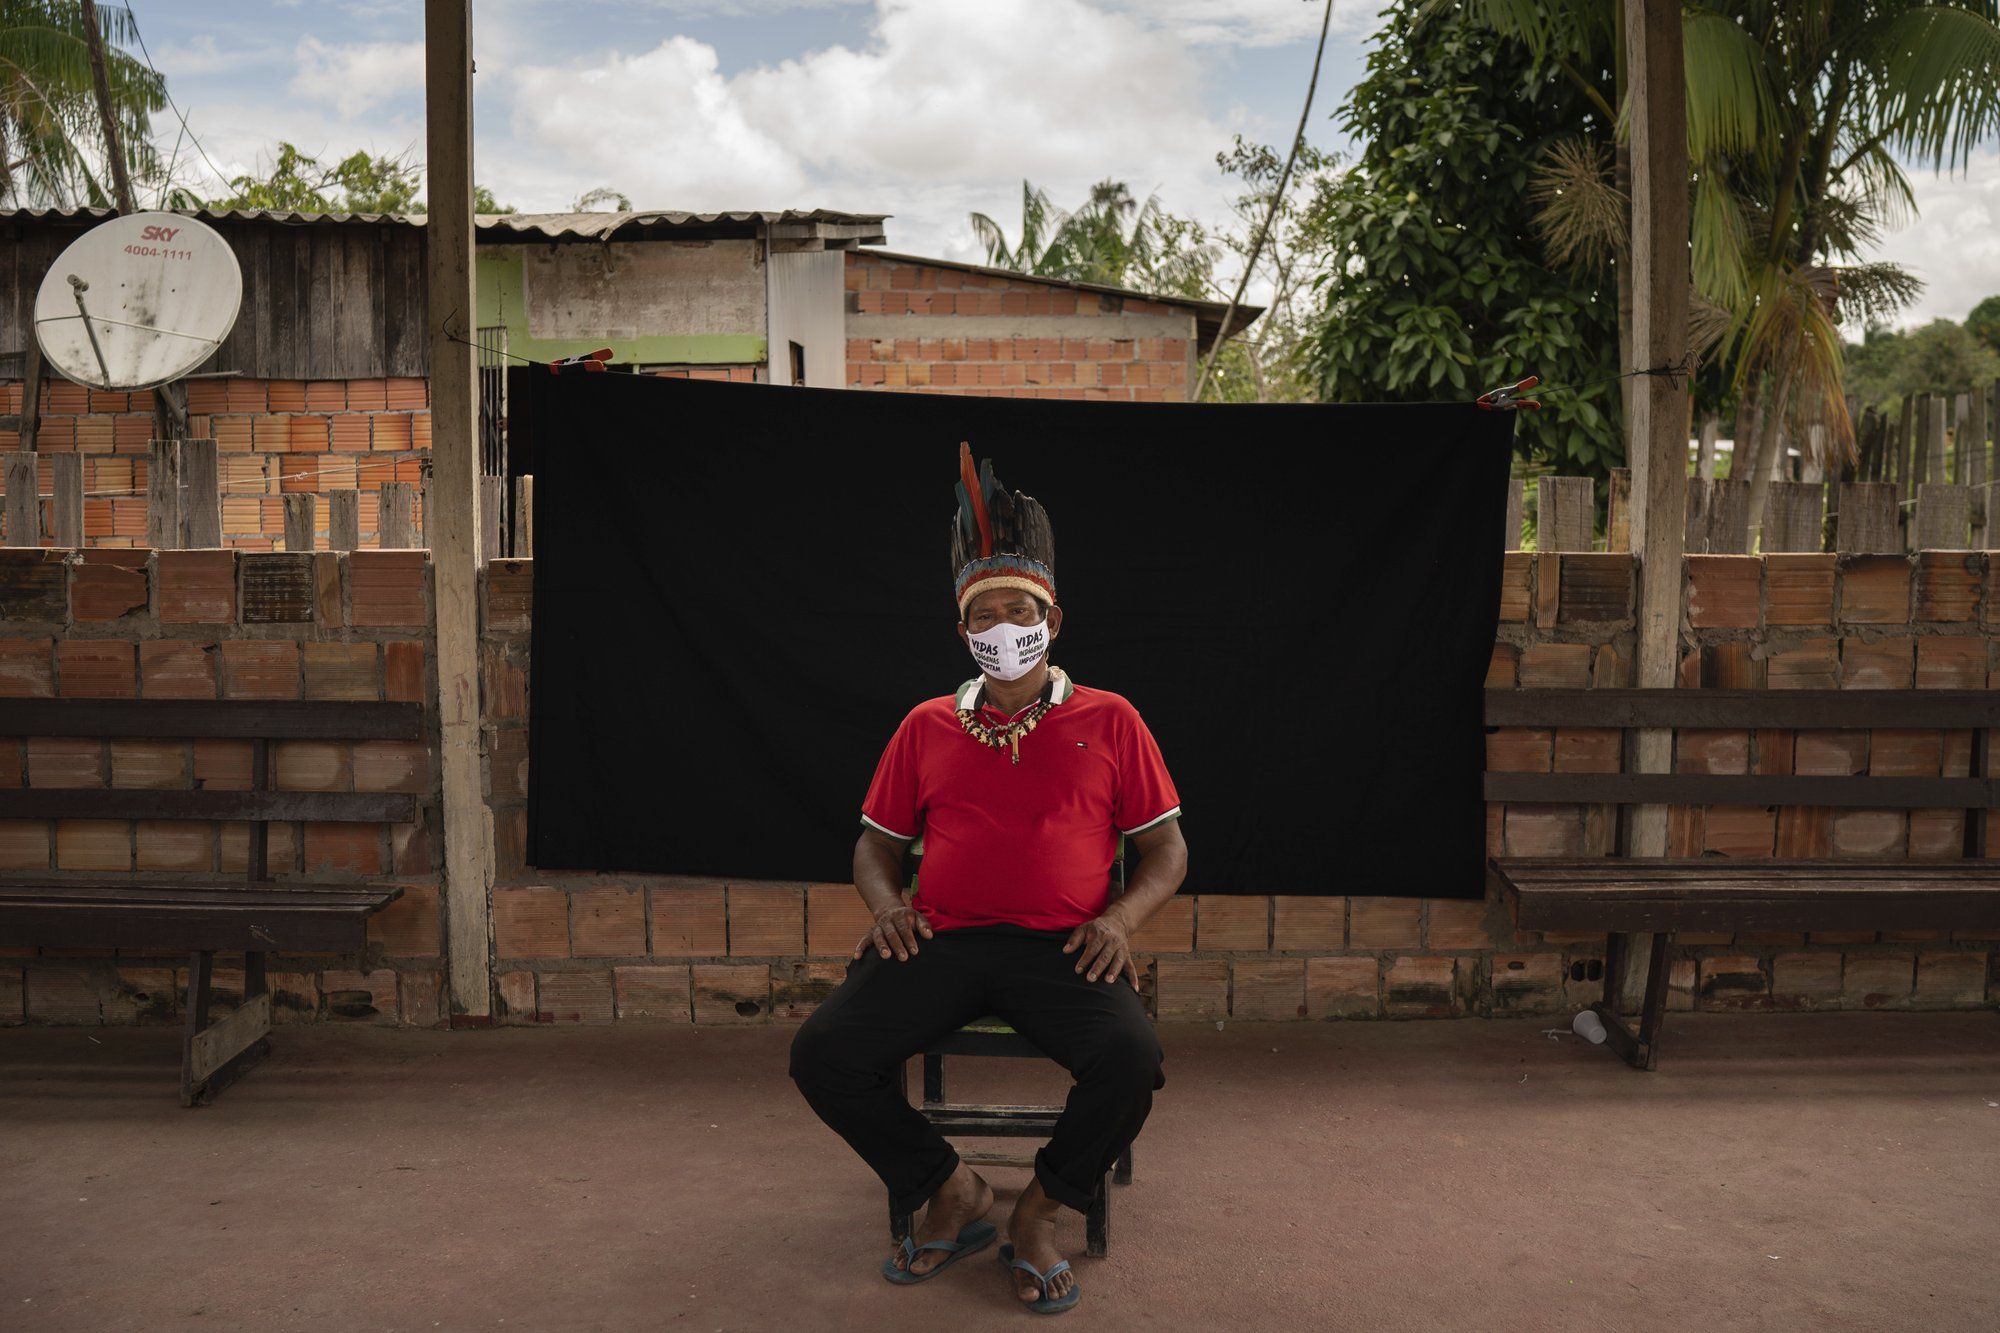 Indigenous leader Jose Augusto, 48, of the Miranha indigenous ethnic group, poses for a portrait wearing a face mask amid the spread of the new coronavirus, at the Park of Indigenous Nations community in Manaus, Brazil, Thursday, May 28, 2020. His mask reads in Portuguese: "Indigenous lives matter." Image by Felipe Dana / AP Photo. Brazil, 2020.